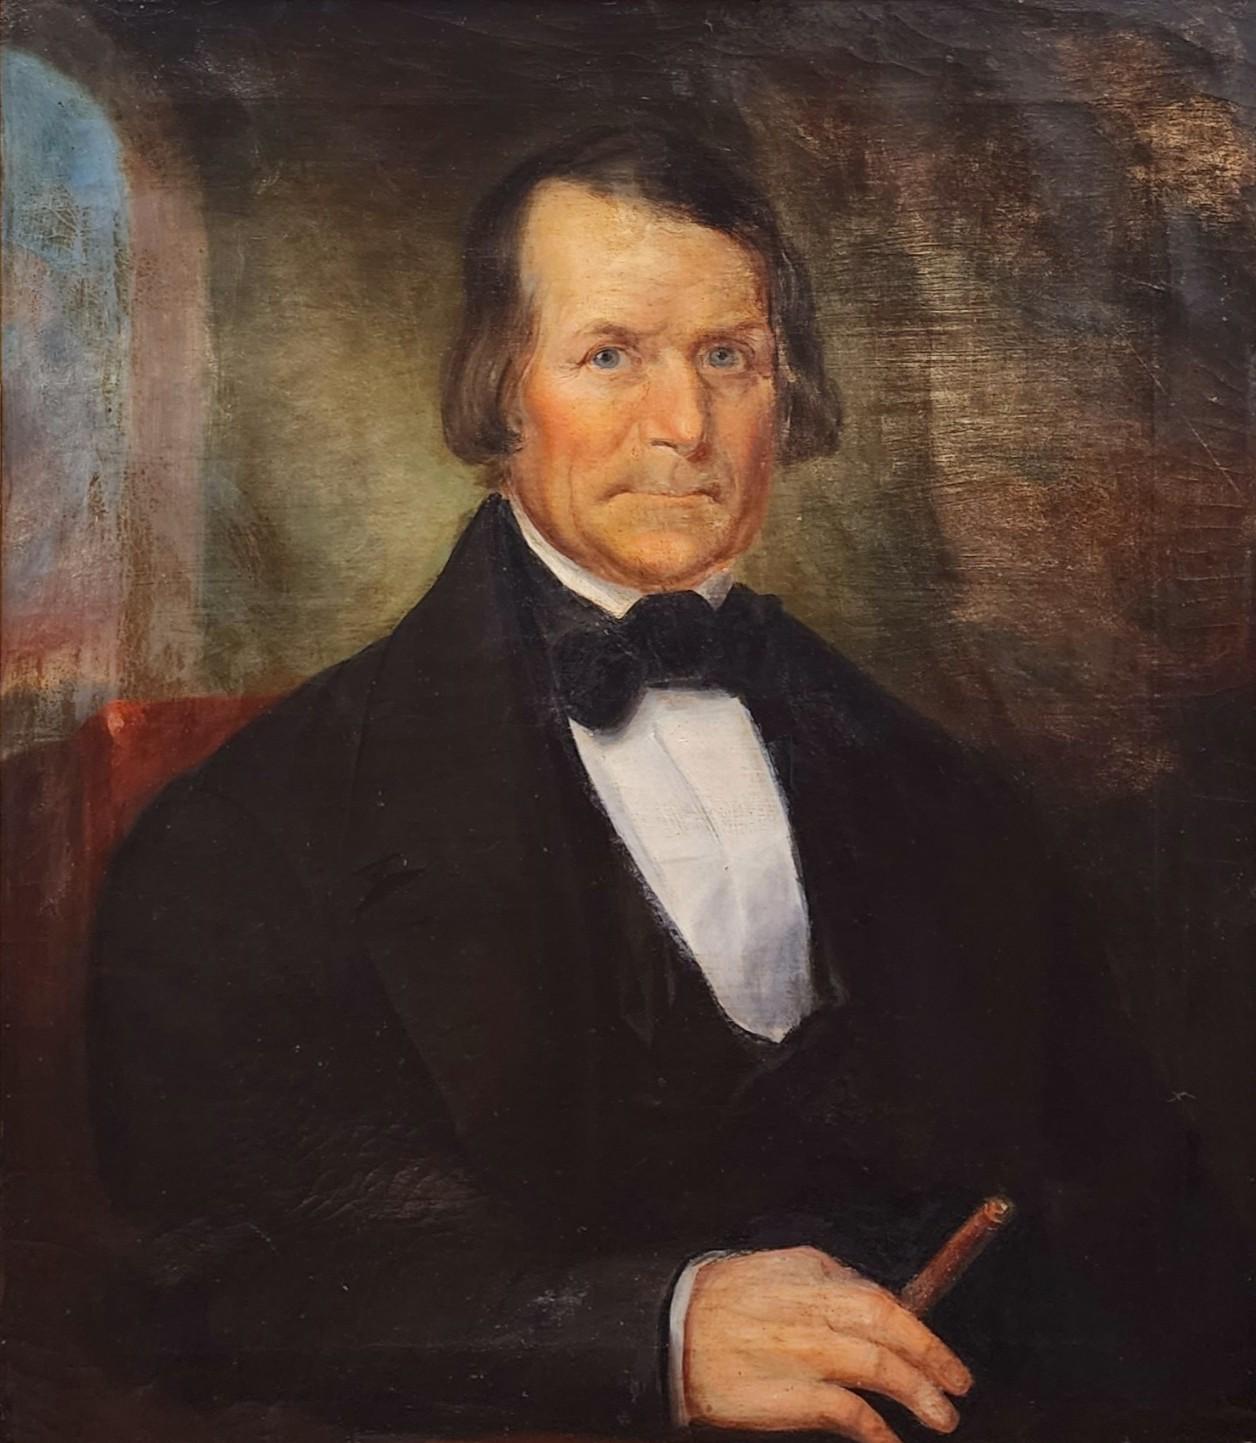 Portrait of a Man with a Cigar, Bowtie, Early American Portraiture, Smoking Man - Brown Portrait Painting by Unknown